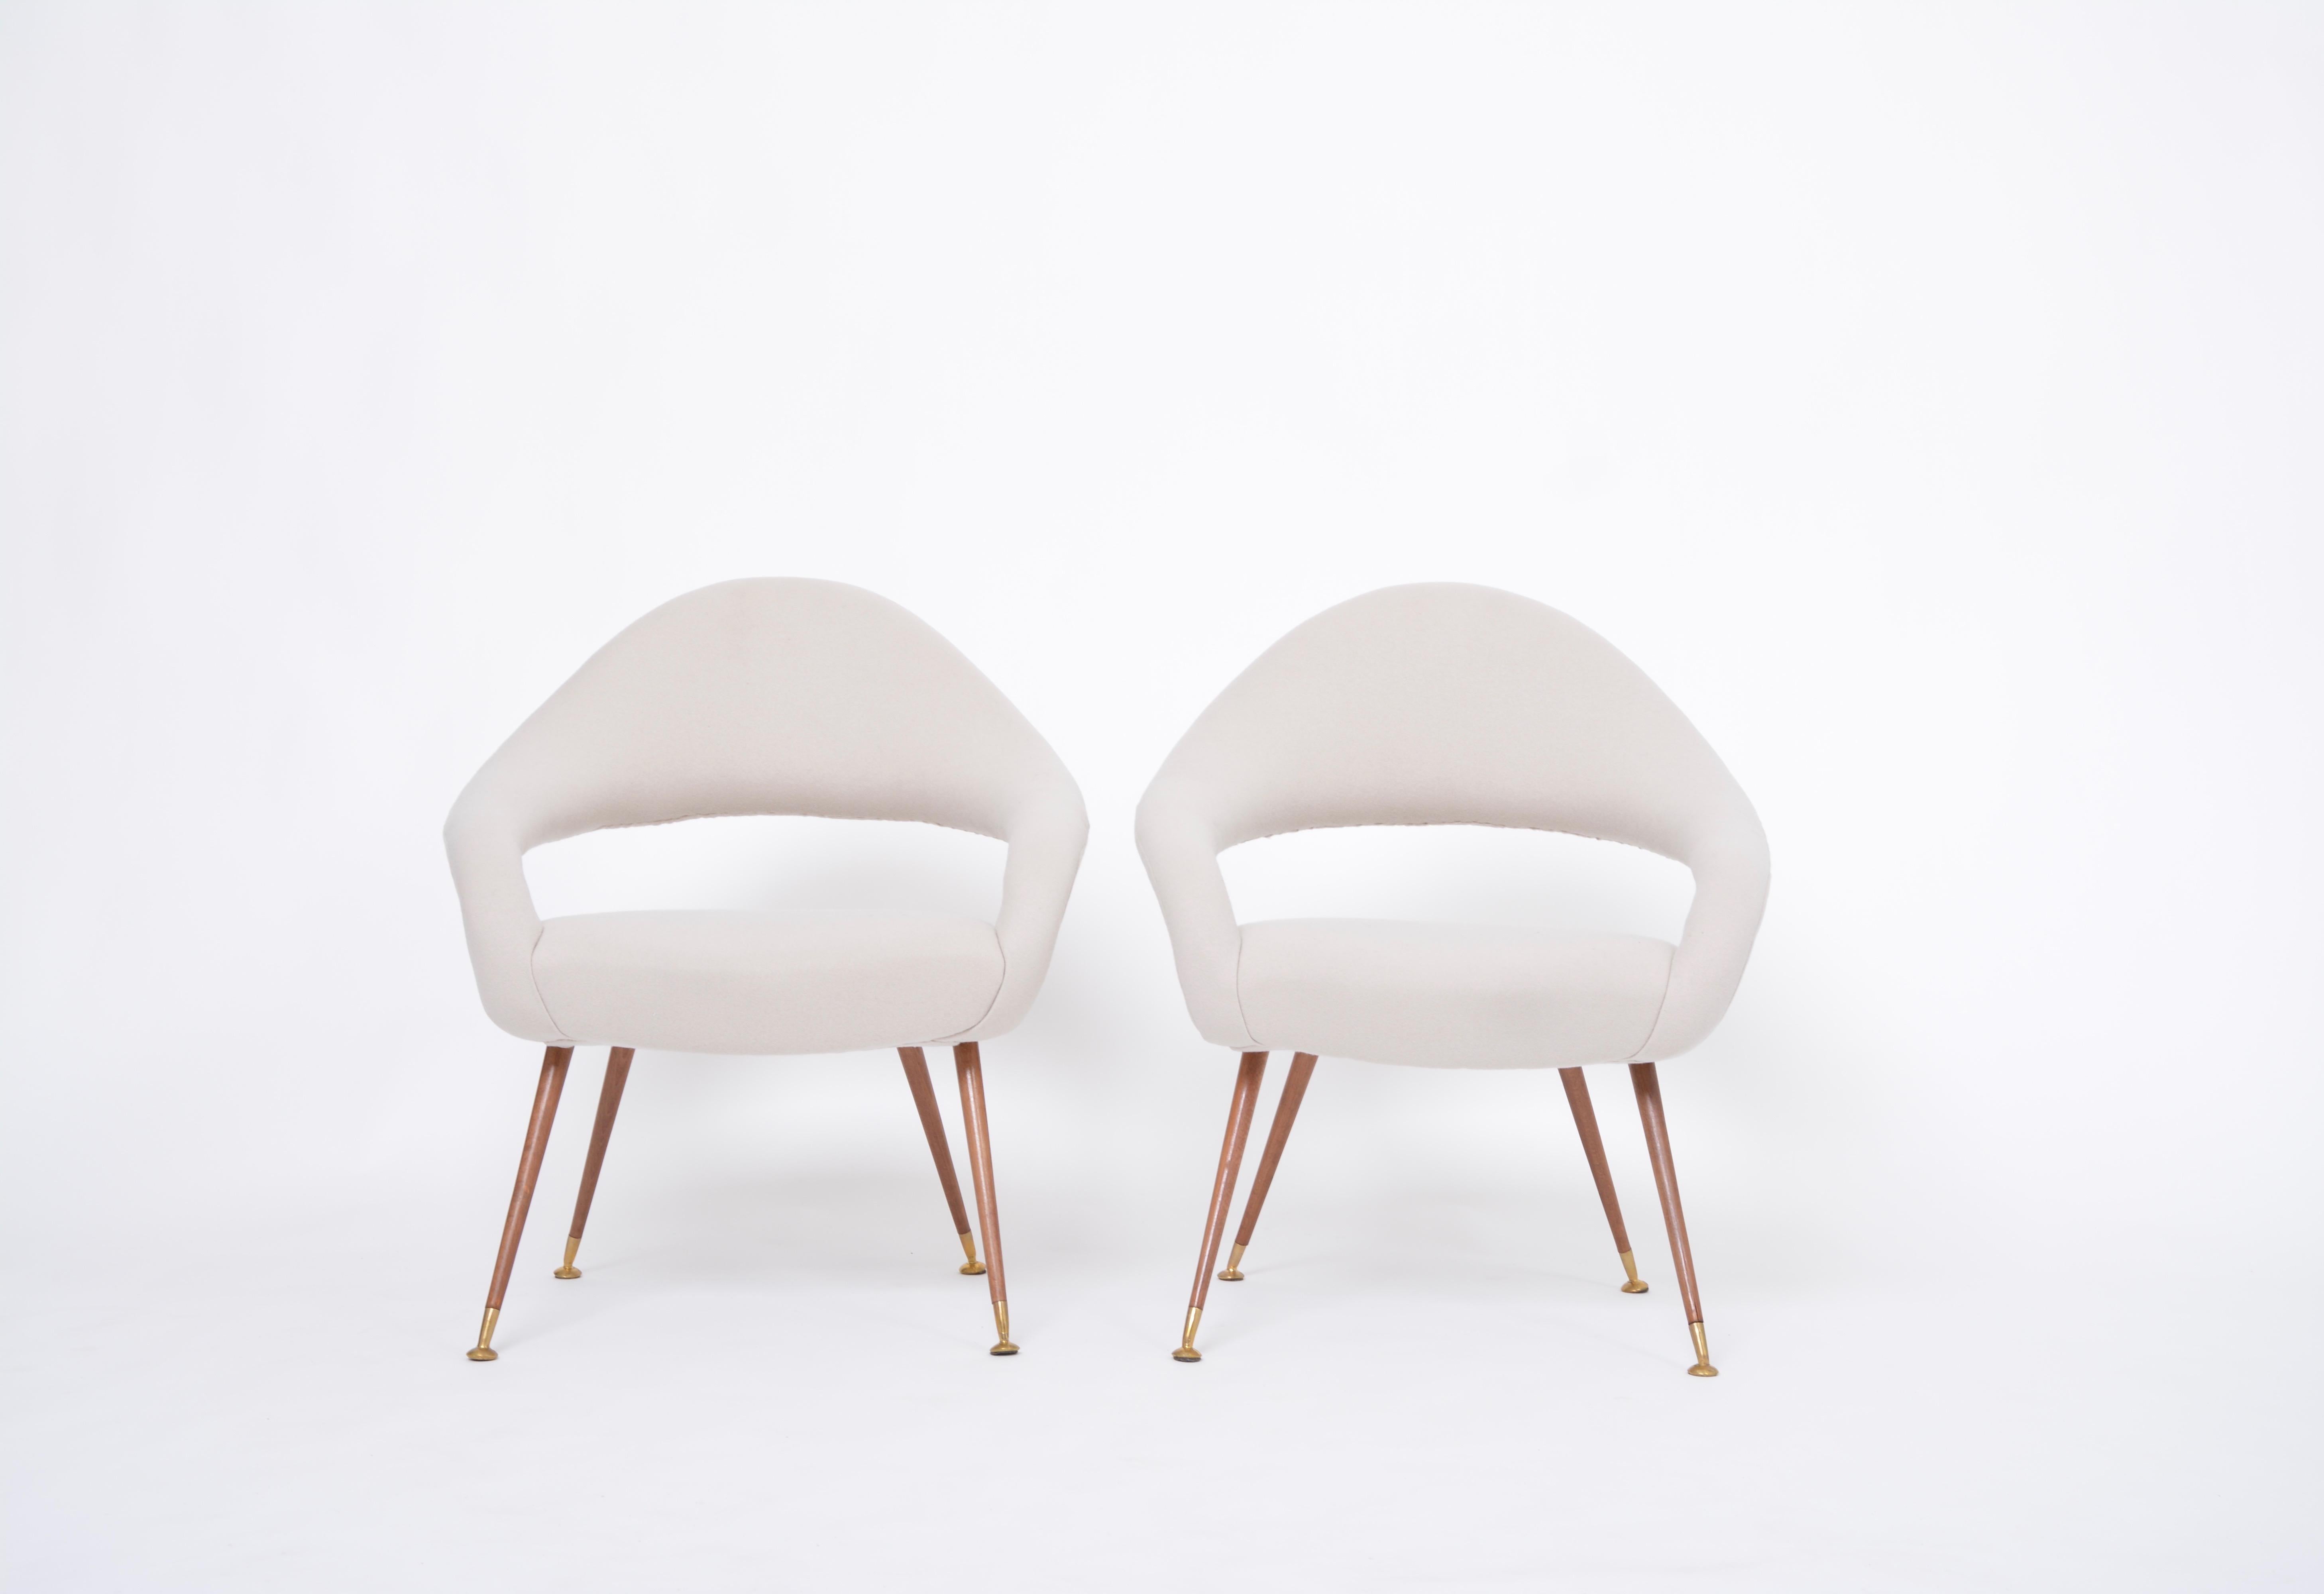 Pair of Italian Mid-Century Lounge Chairs Model DU 55 P by Gastone Rinaldi 
Gastone Rinaldi designed this chair in 1955 for Italian production company Rima. Over the years, this chair has become one of his most iconic designs and is highly sought